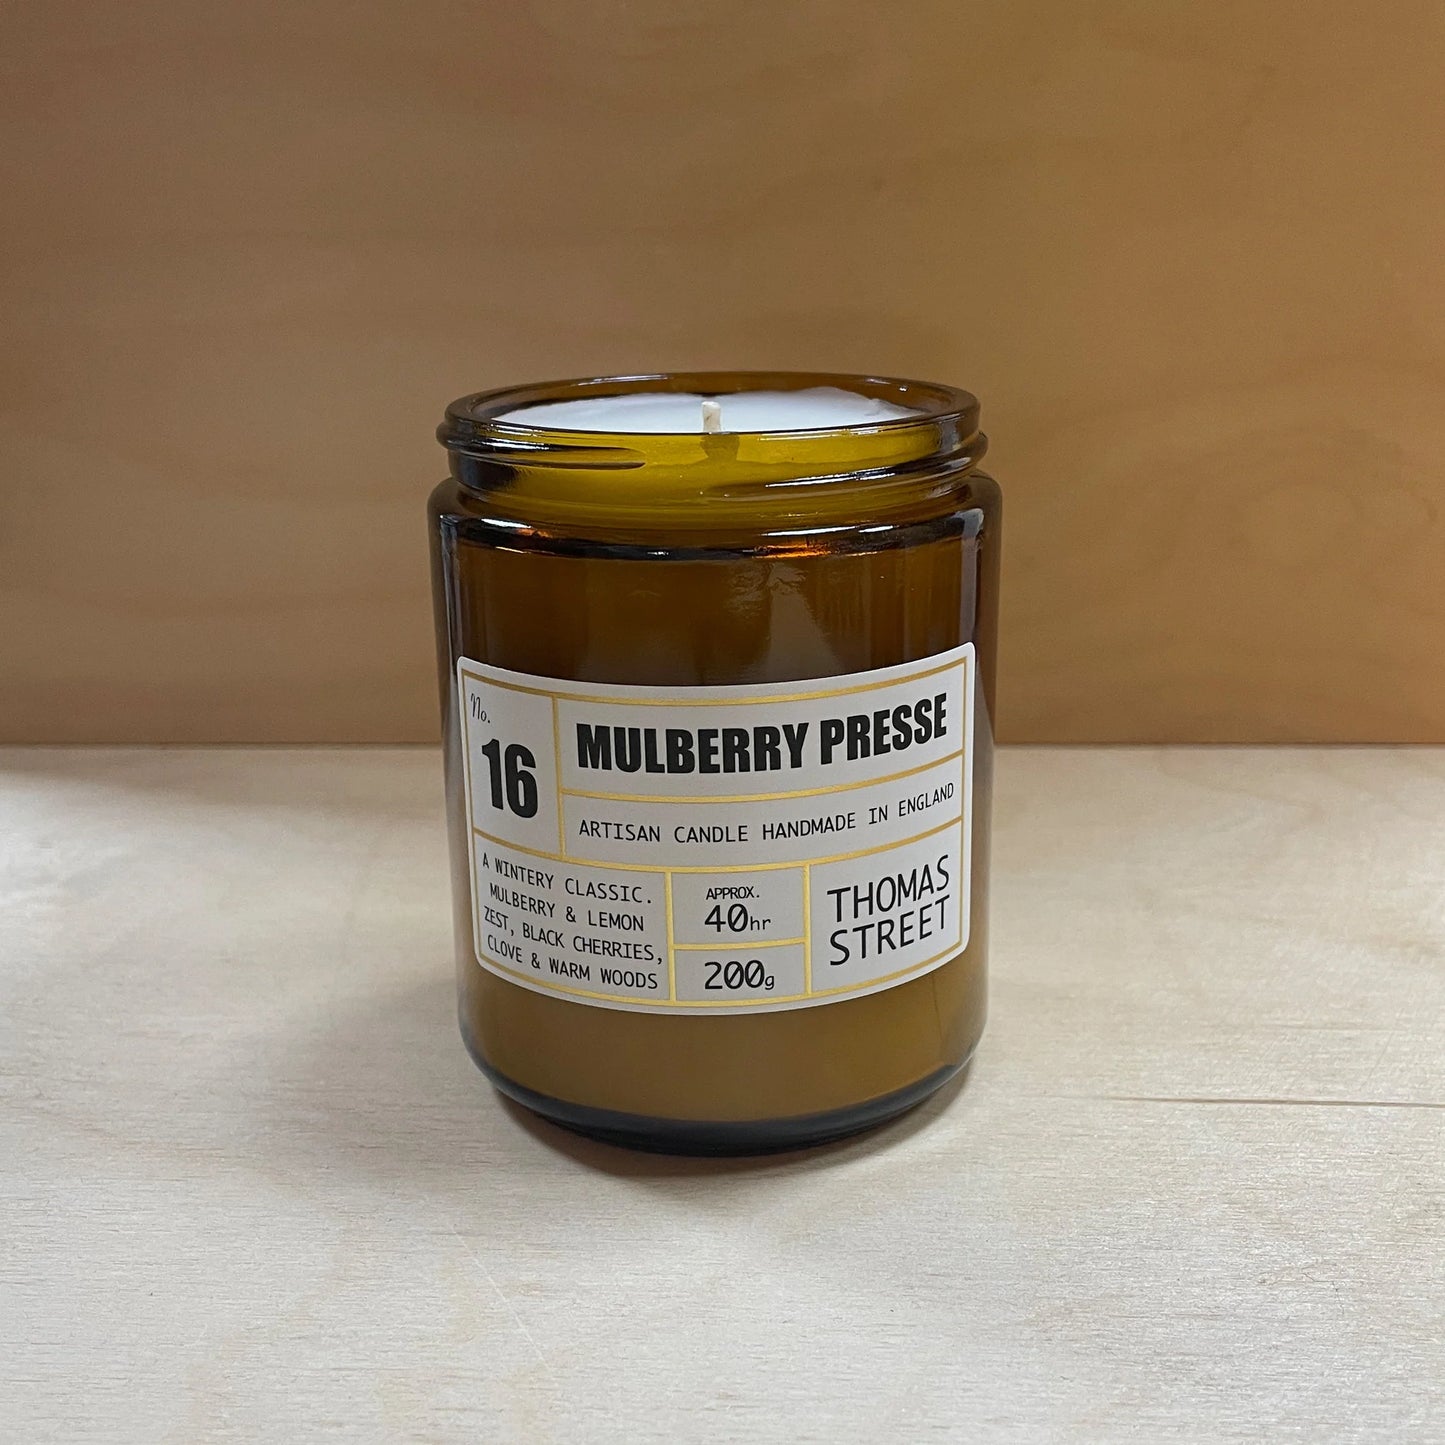 Thomas Street Apothecary Candle Jar 200g Mulberry Presse